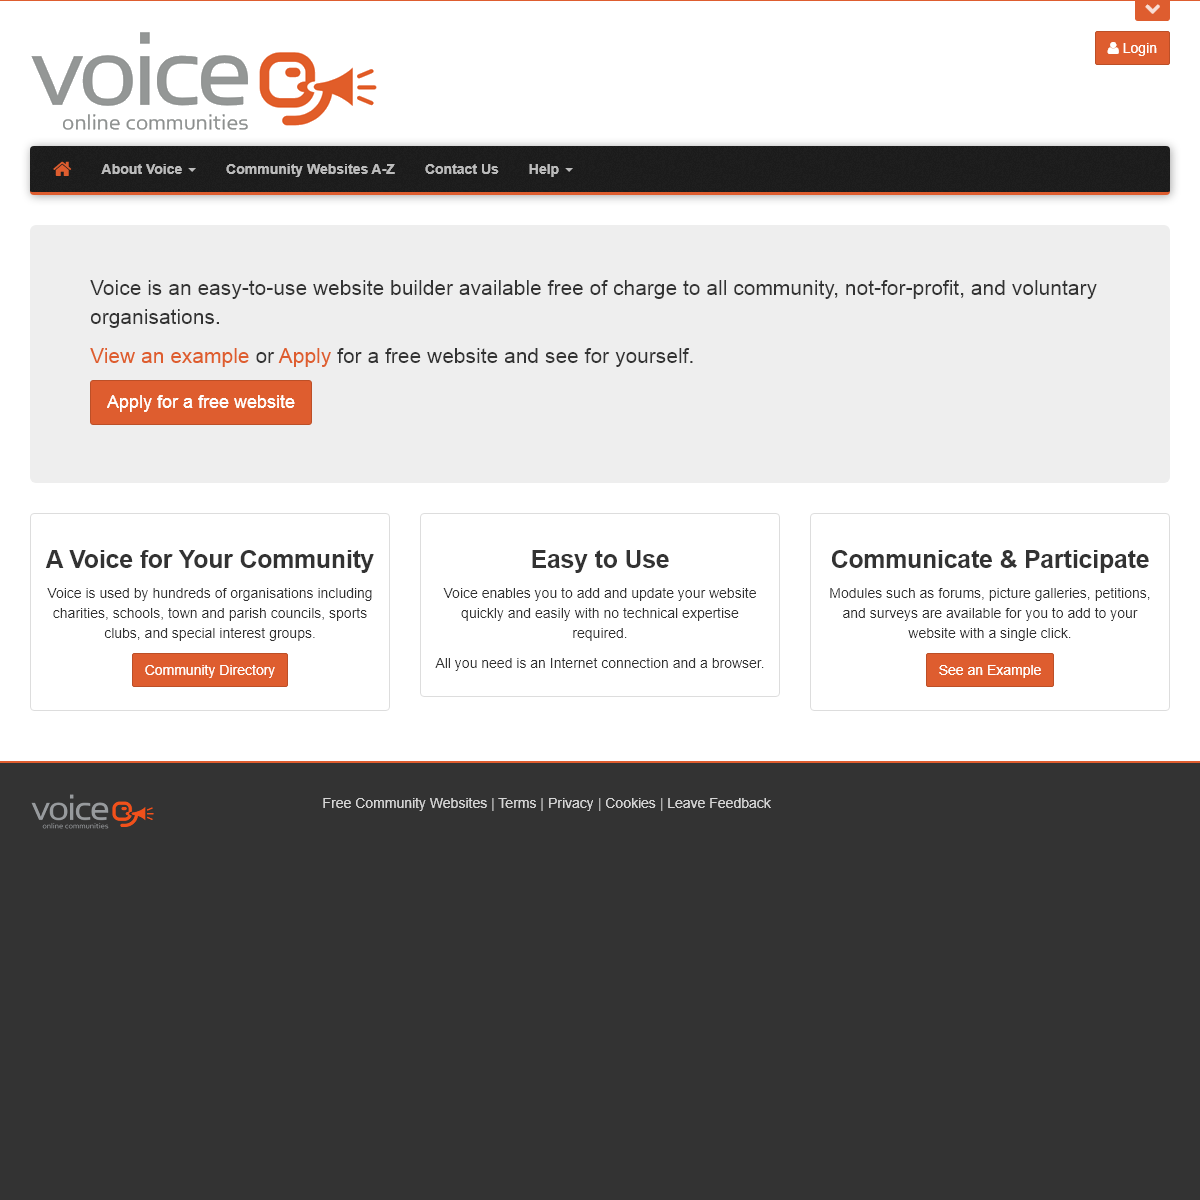 A complete backup of e-voice.org.uk